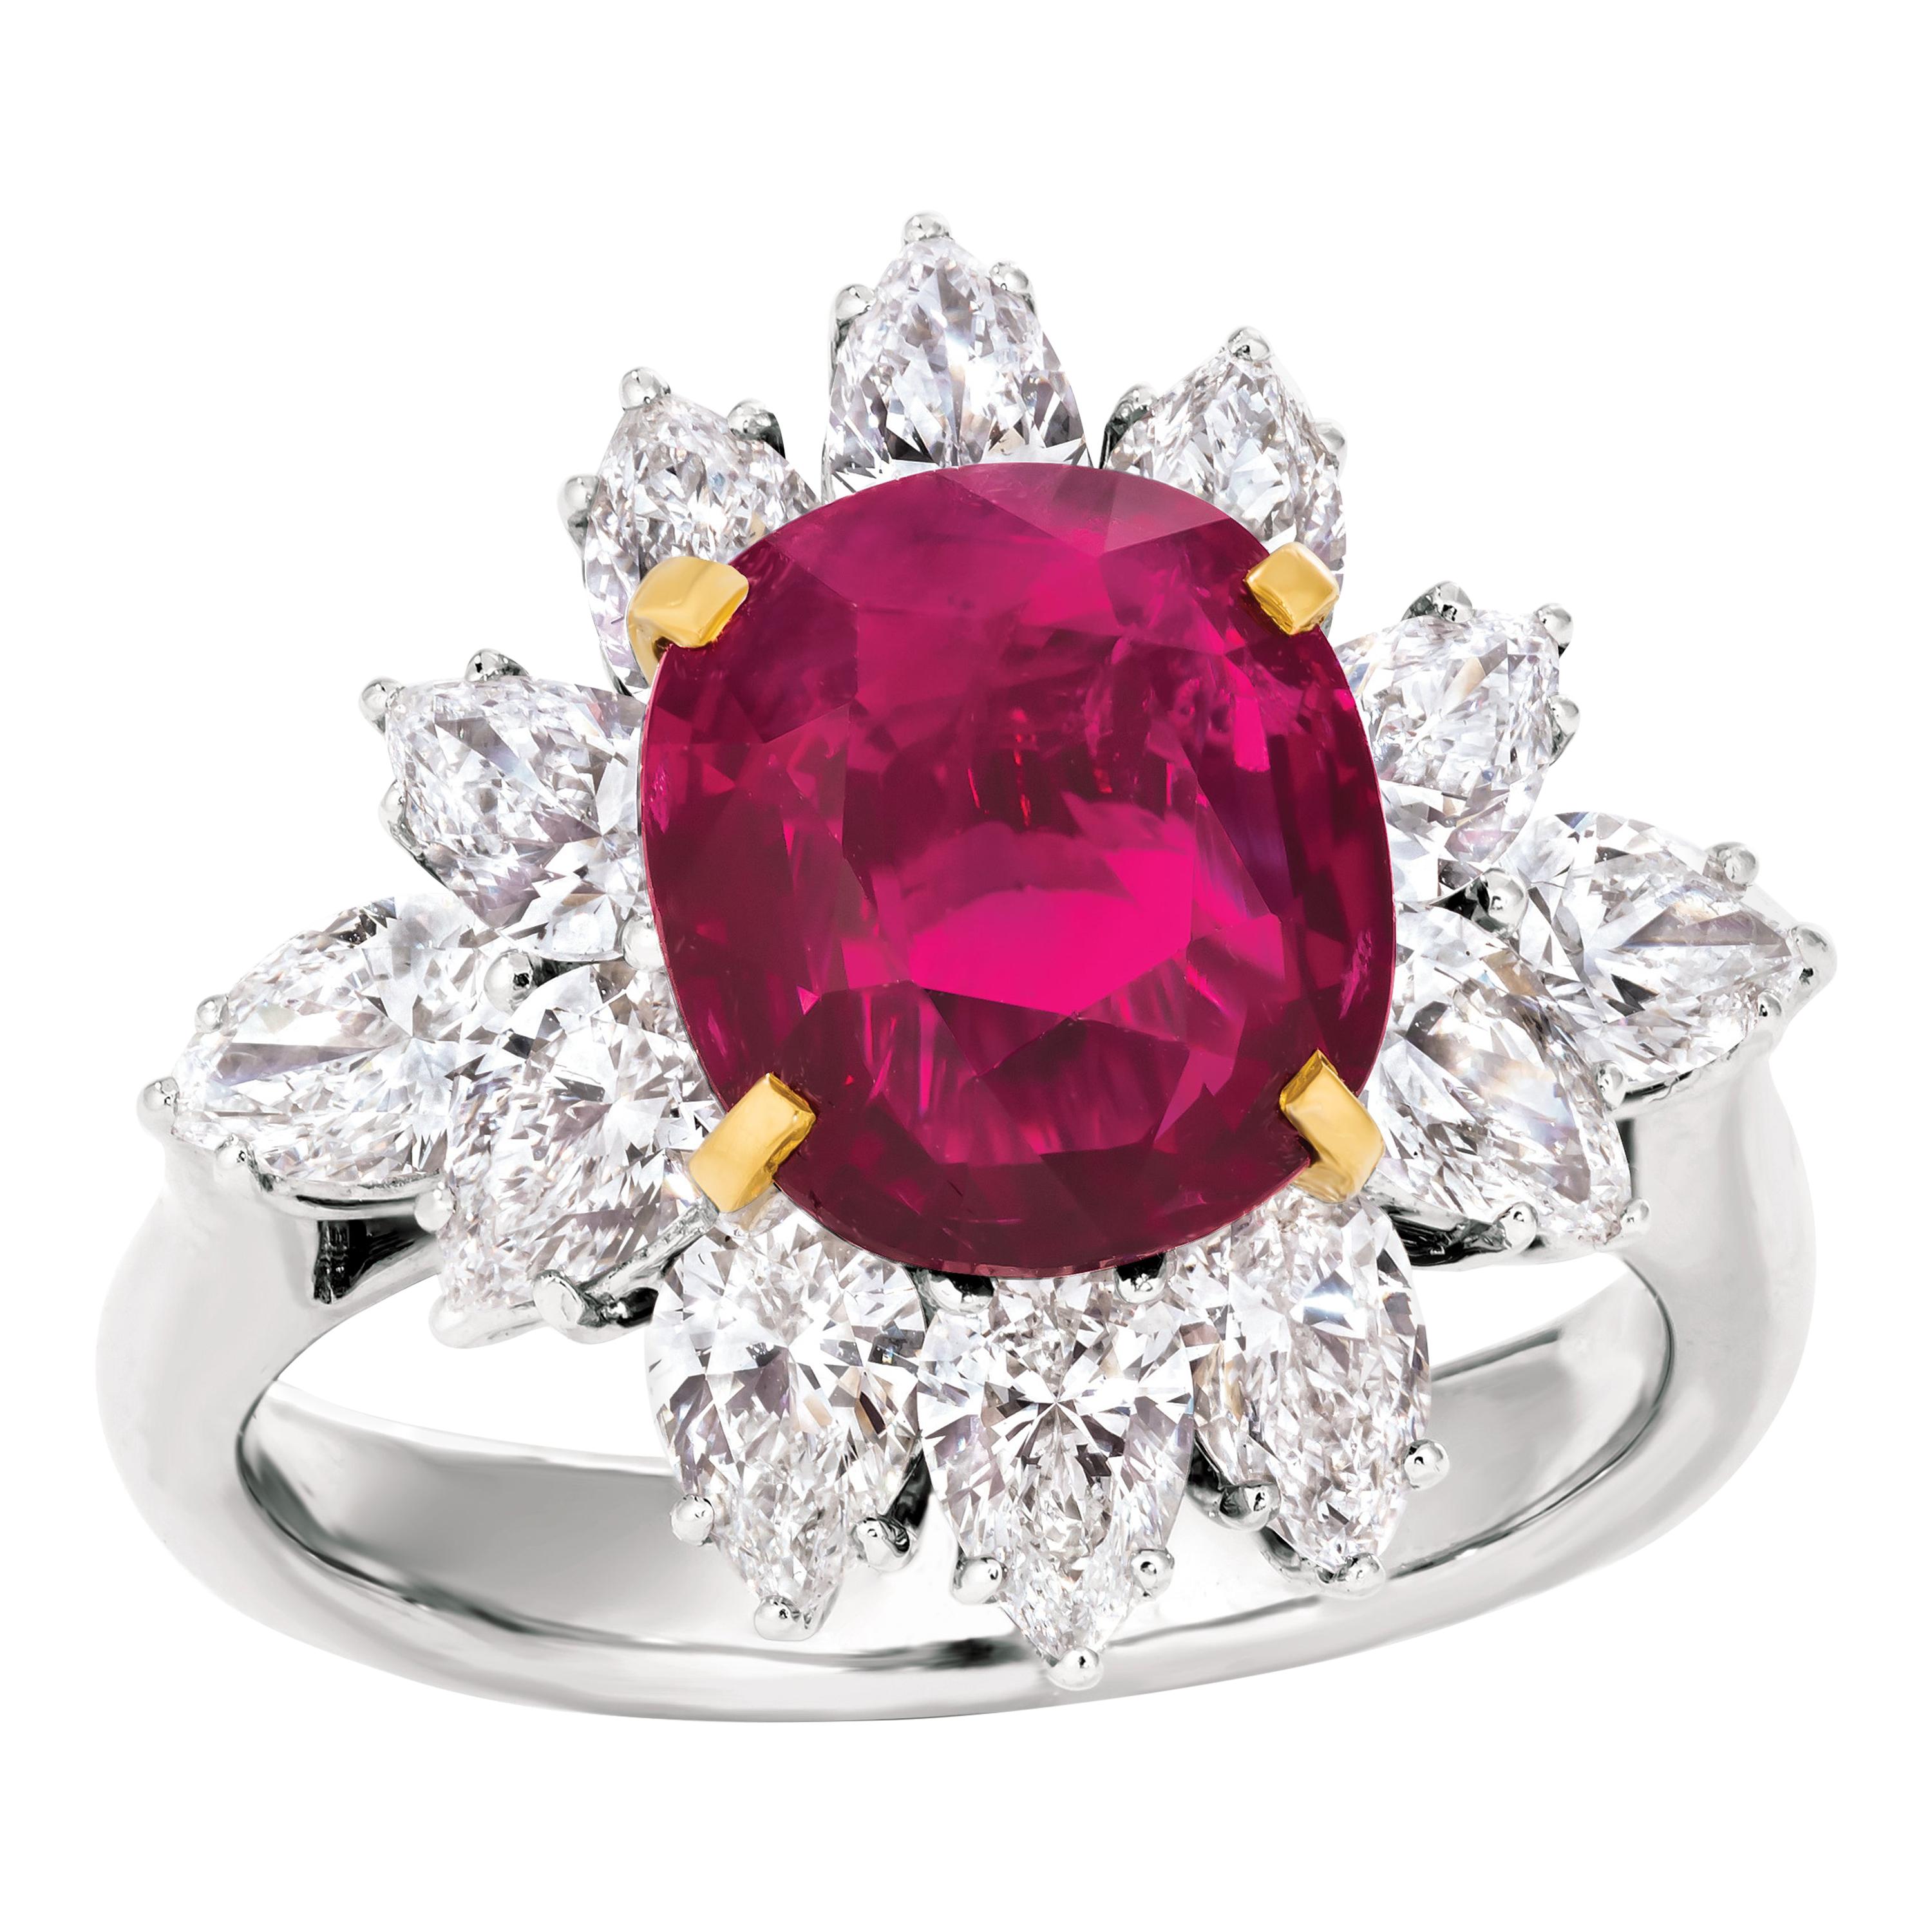 Triple Certified 4.09ct Natural Burmese Ruby & Diamond Cocktail Ring 18Kt Gold 